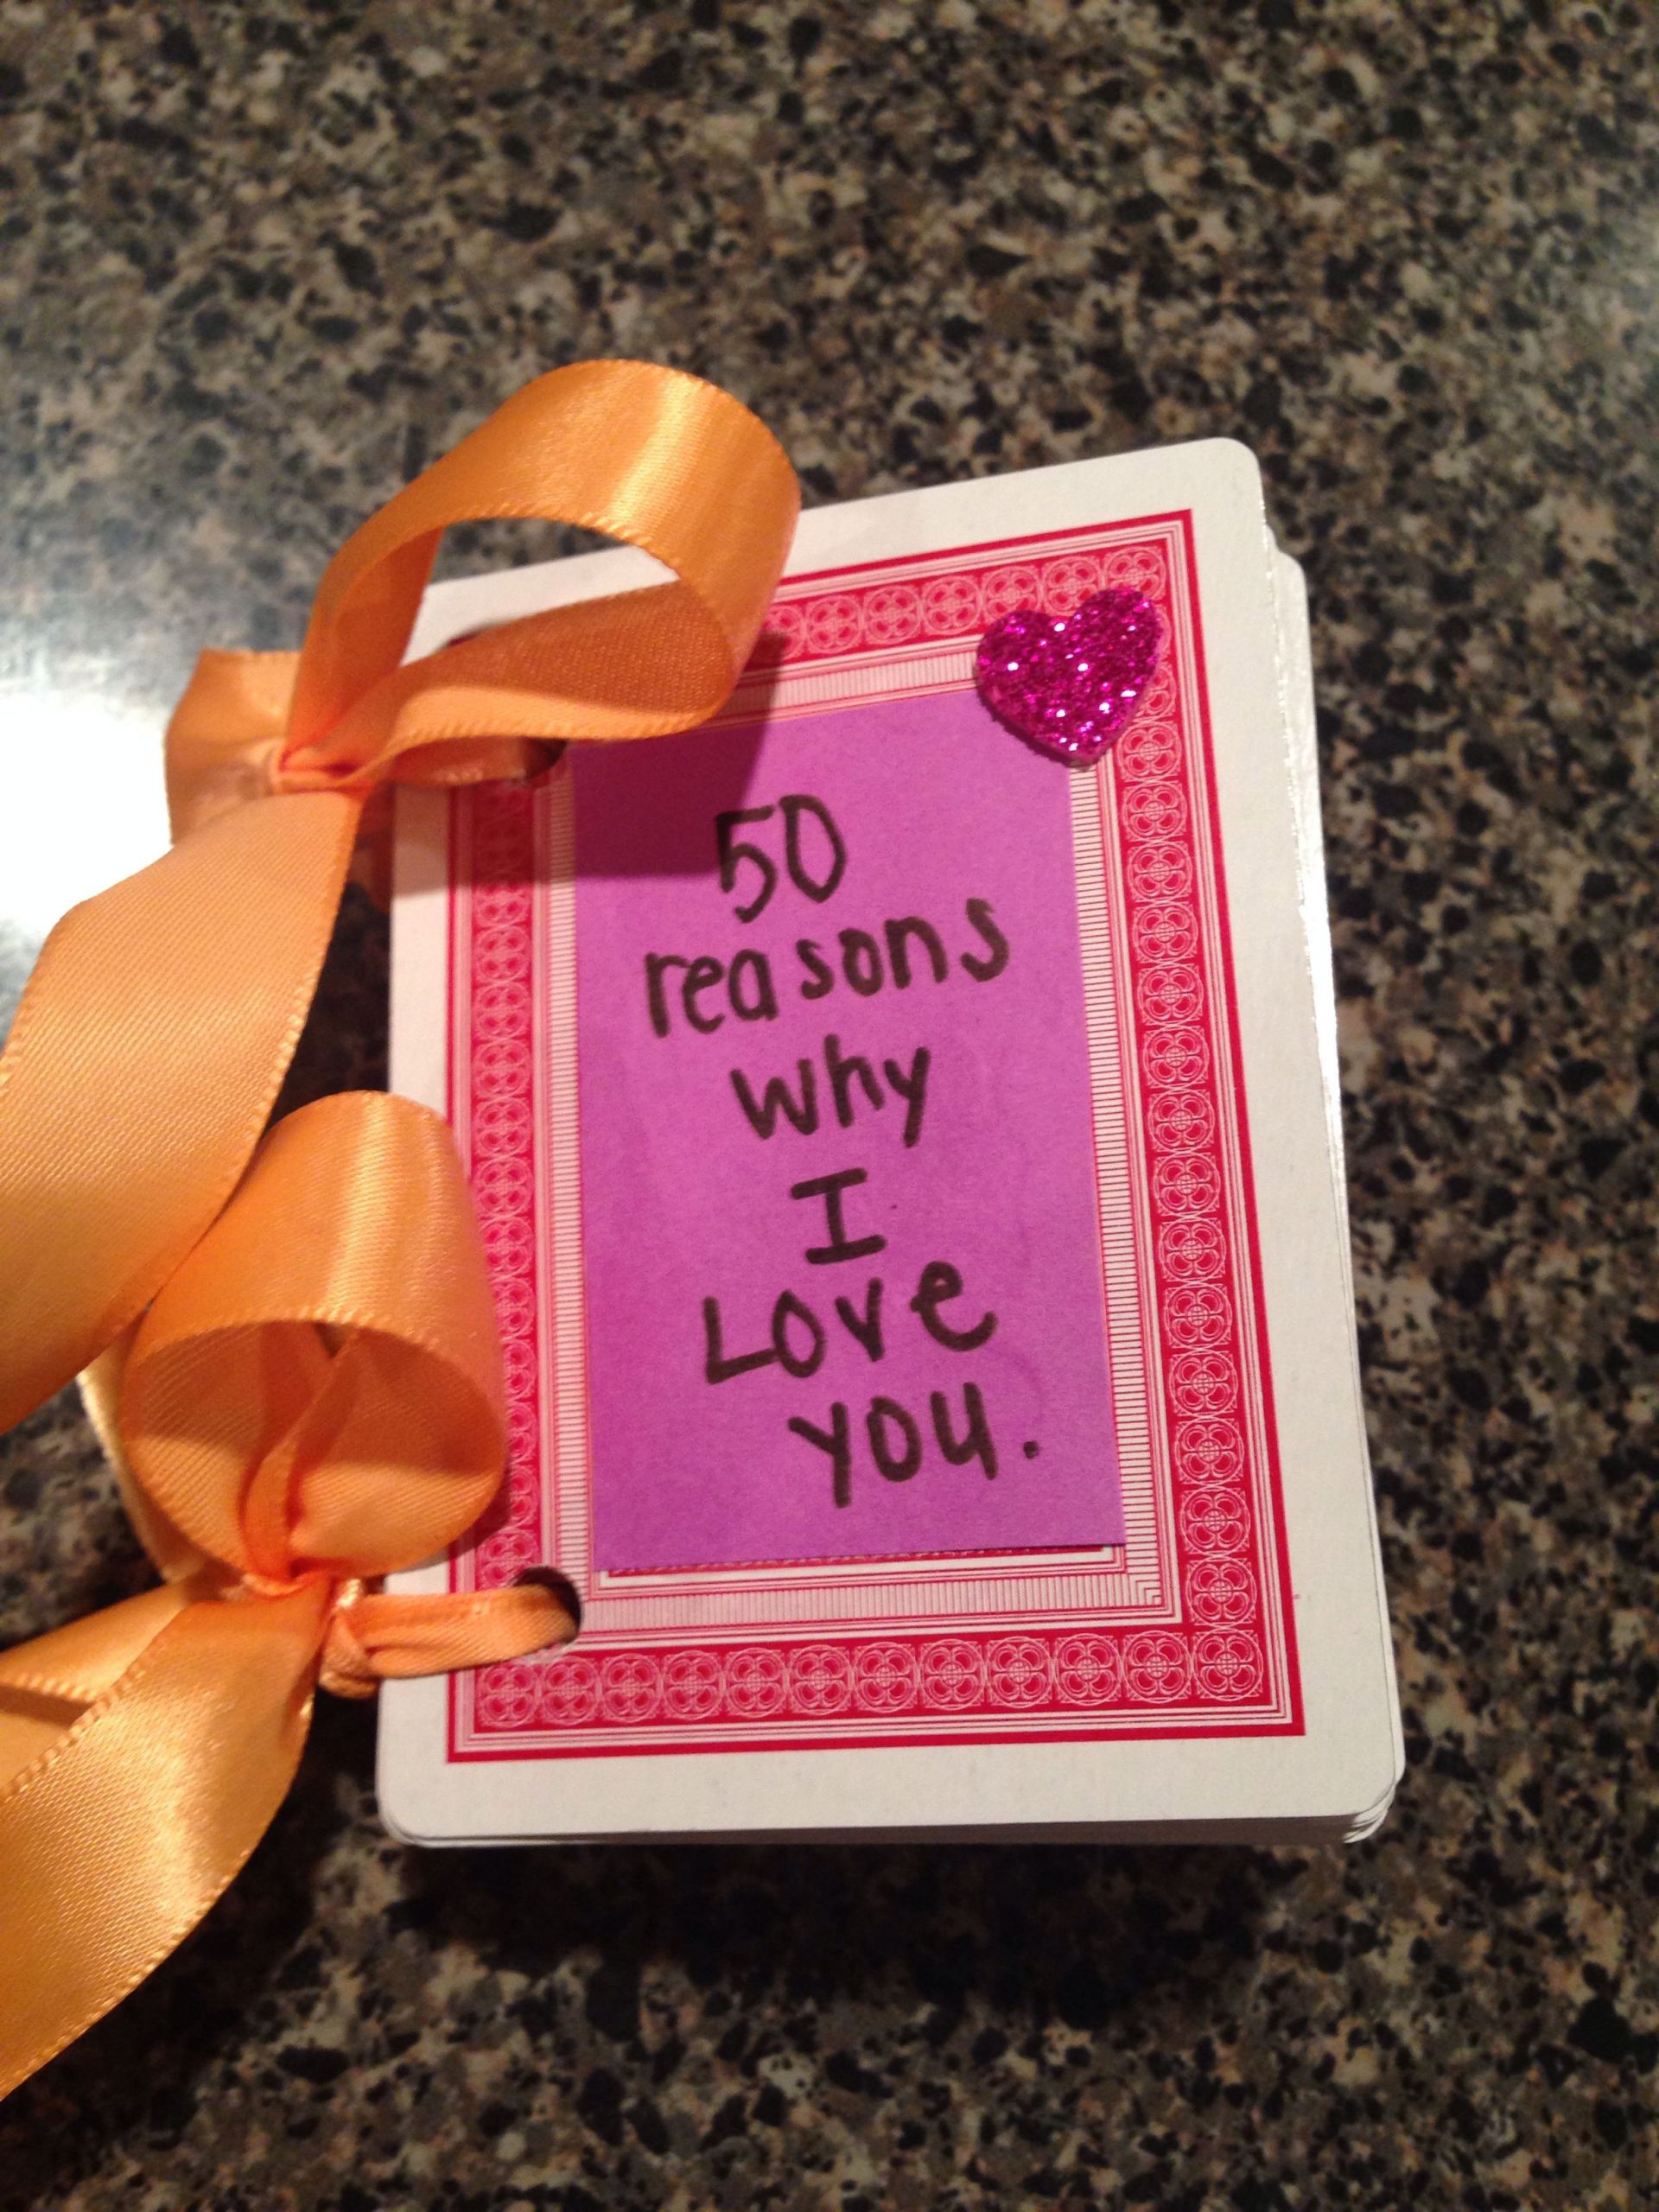 Cute Diy Gift Ideas For Boyfriend
 Pin by Karrie Philpot on Gifting